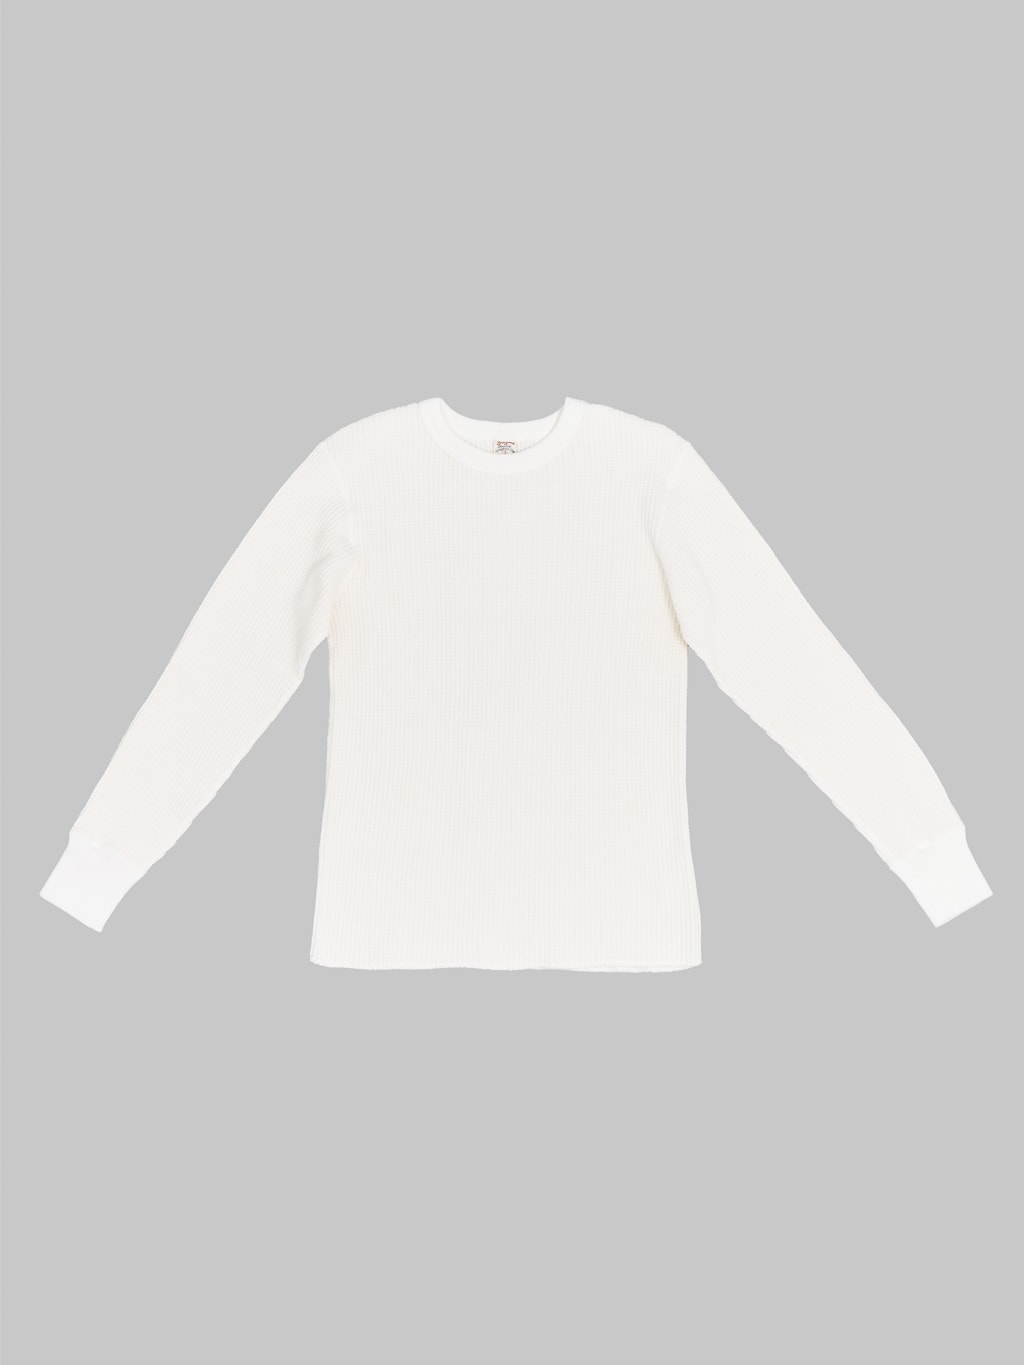 UES Thermal Big Waffle Tshirt white front fit